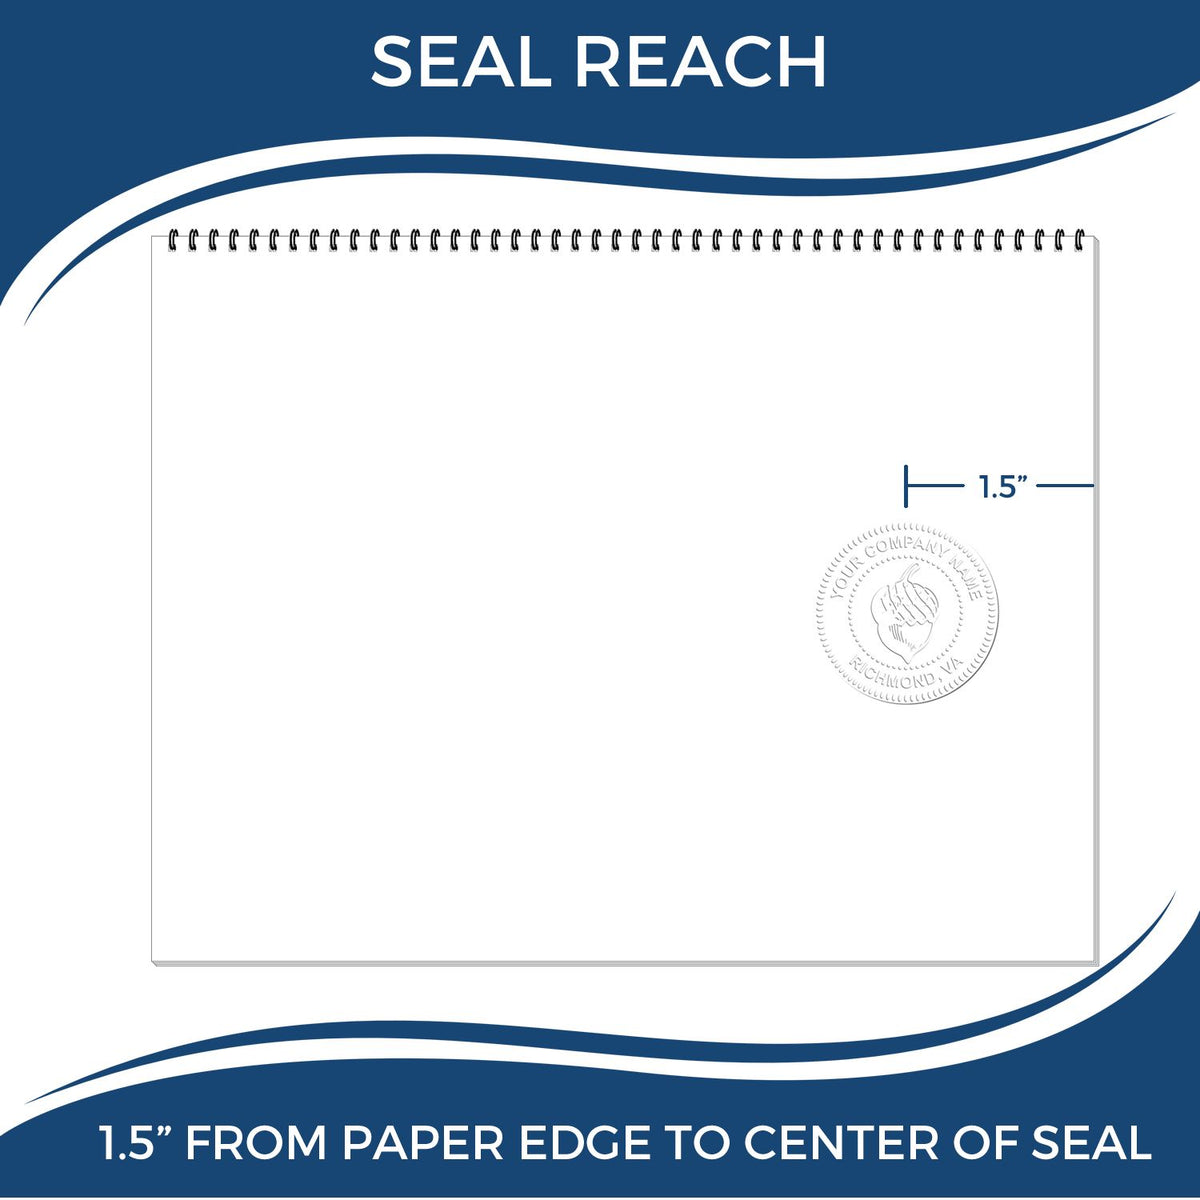 An infographic showing the seal reach which is represented by a ruler and a miniature seal image of the Handheld Nebraska Land Surveyor Seal